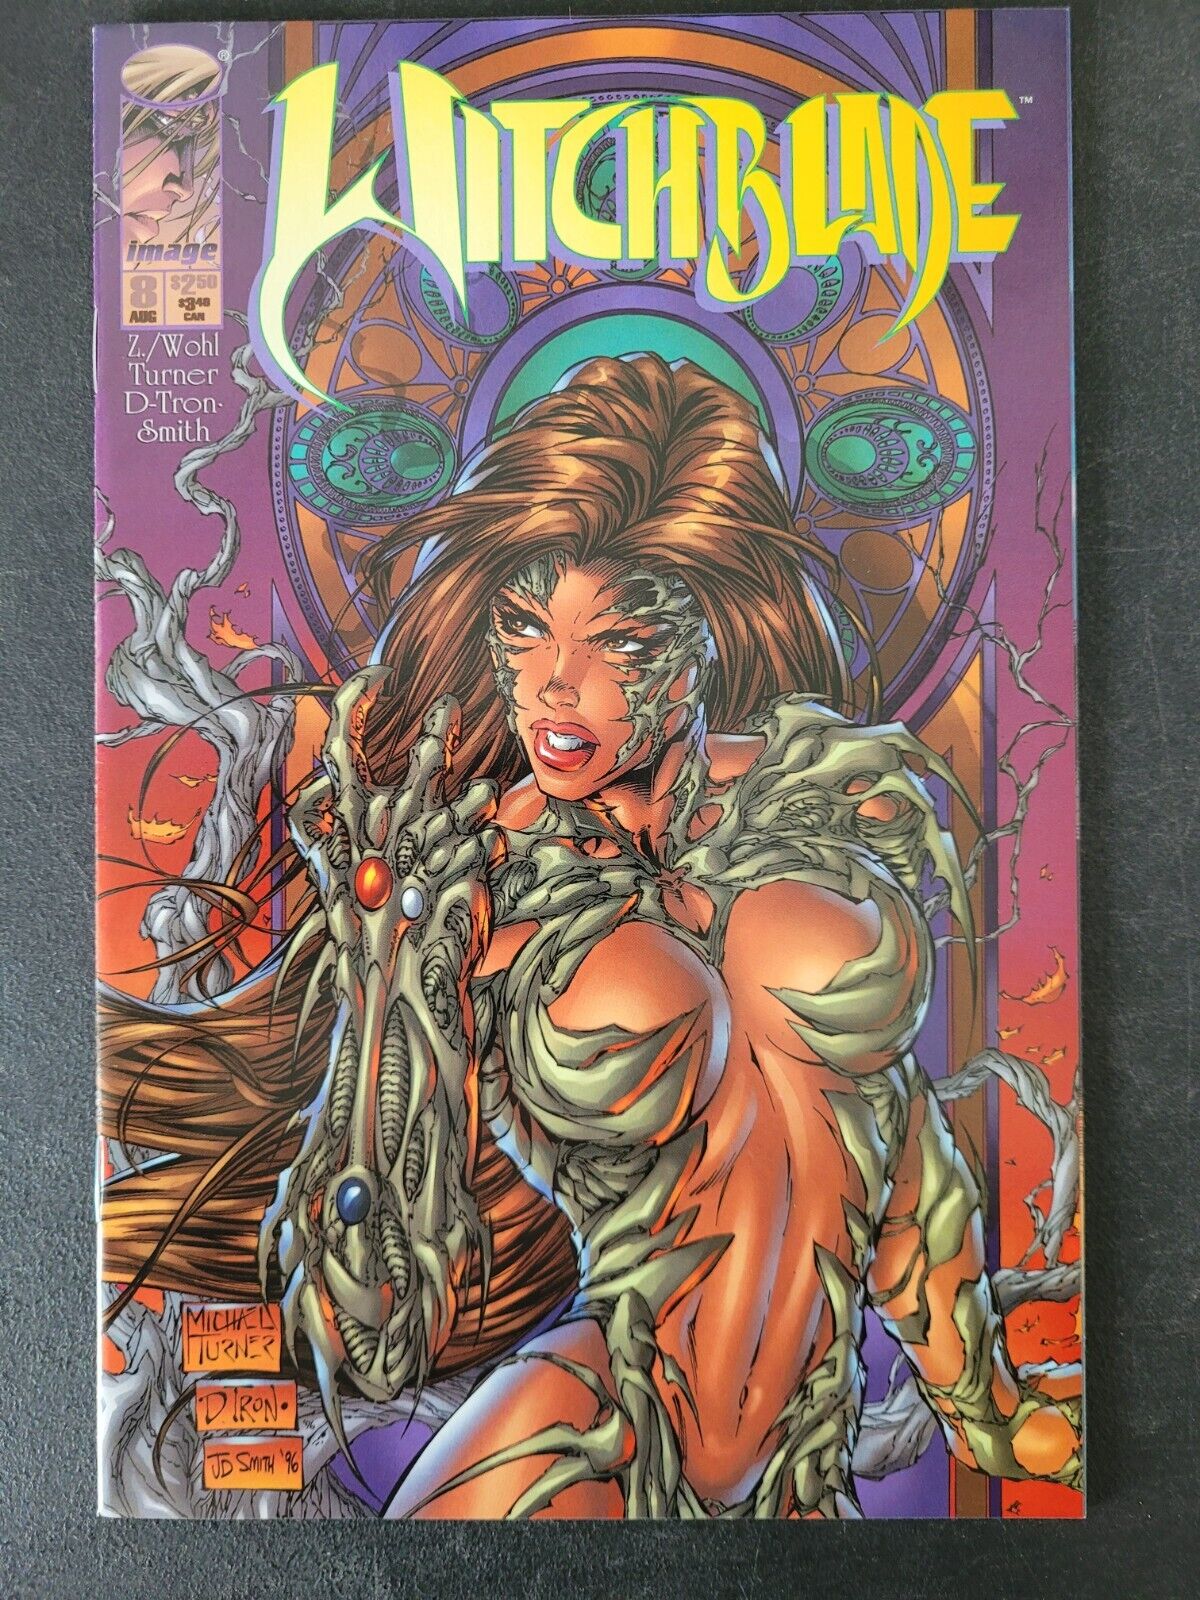 WITCHBLADE #8 (1996) IMAGE COMICS AMAZING COVER & ART by MICHAEL TURNER